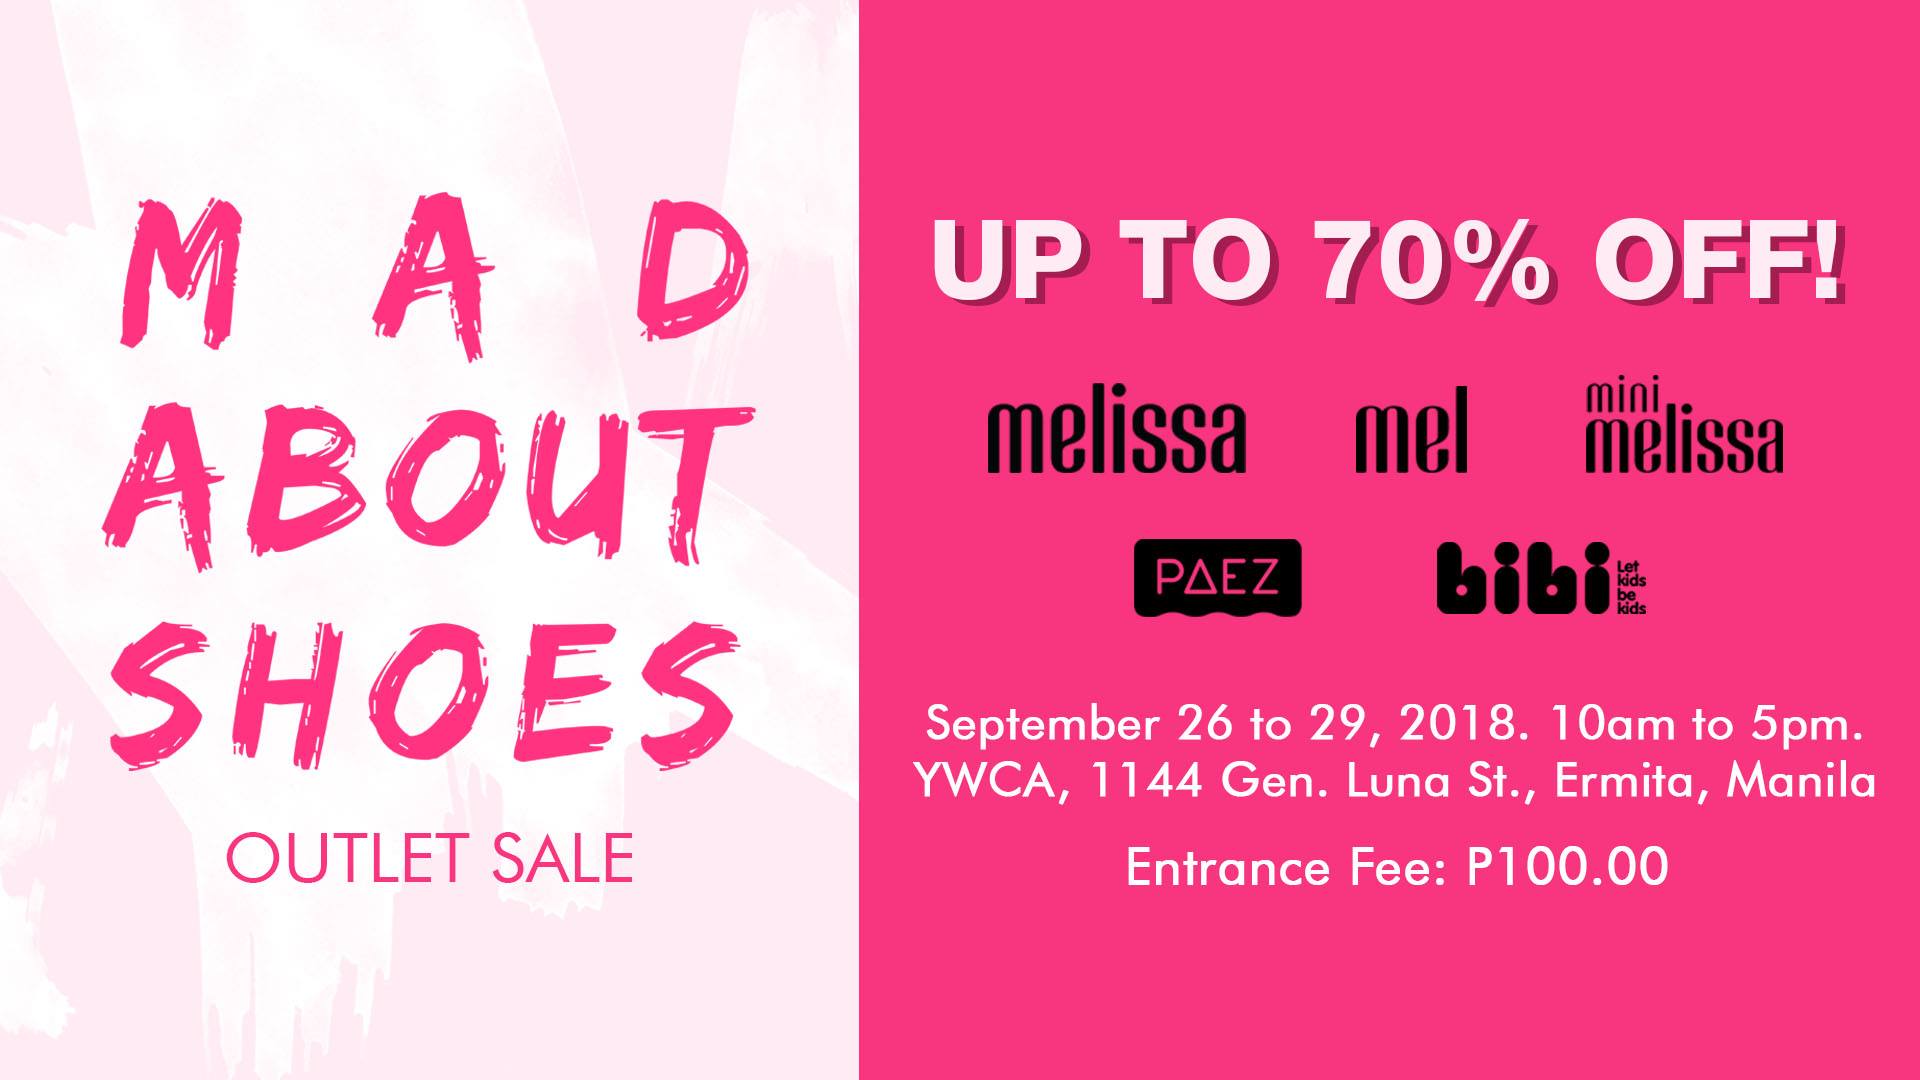 Mad About Shoes Outlet Sale 2018